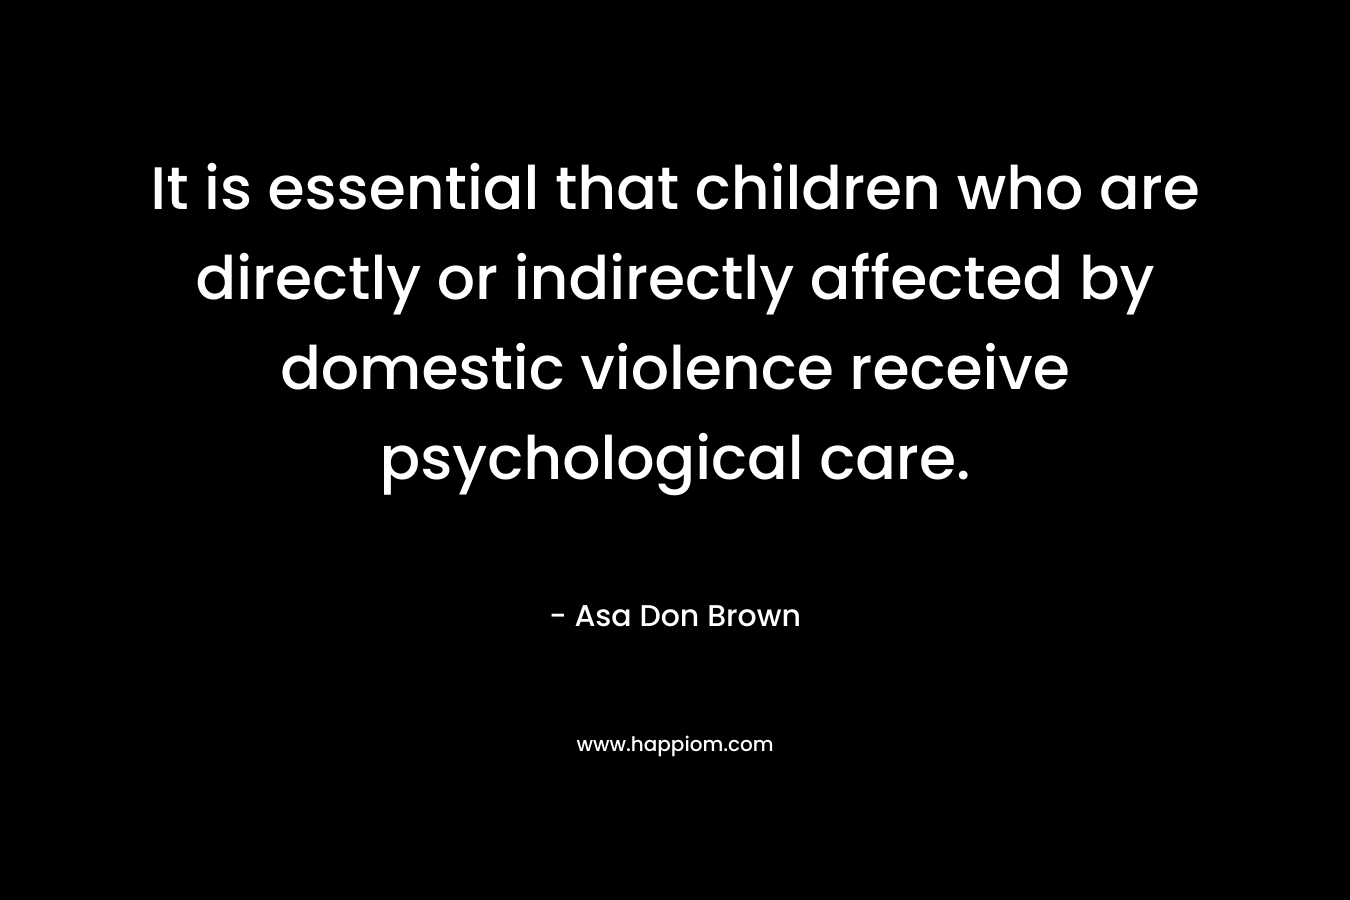 It is essential that children who are directly or indirectly affected by domestic violence receive psychological care. – Asa Don Brown